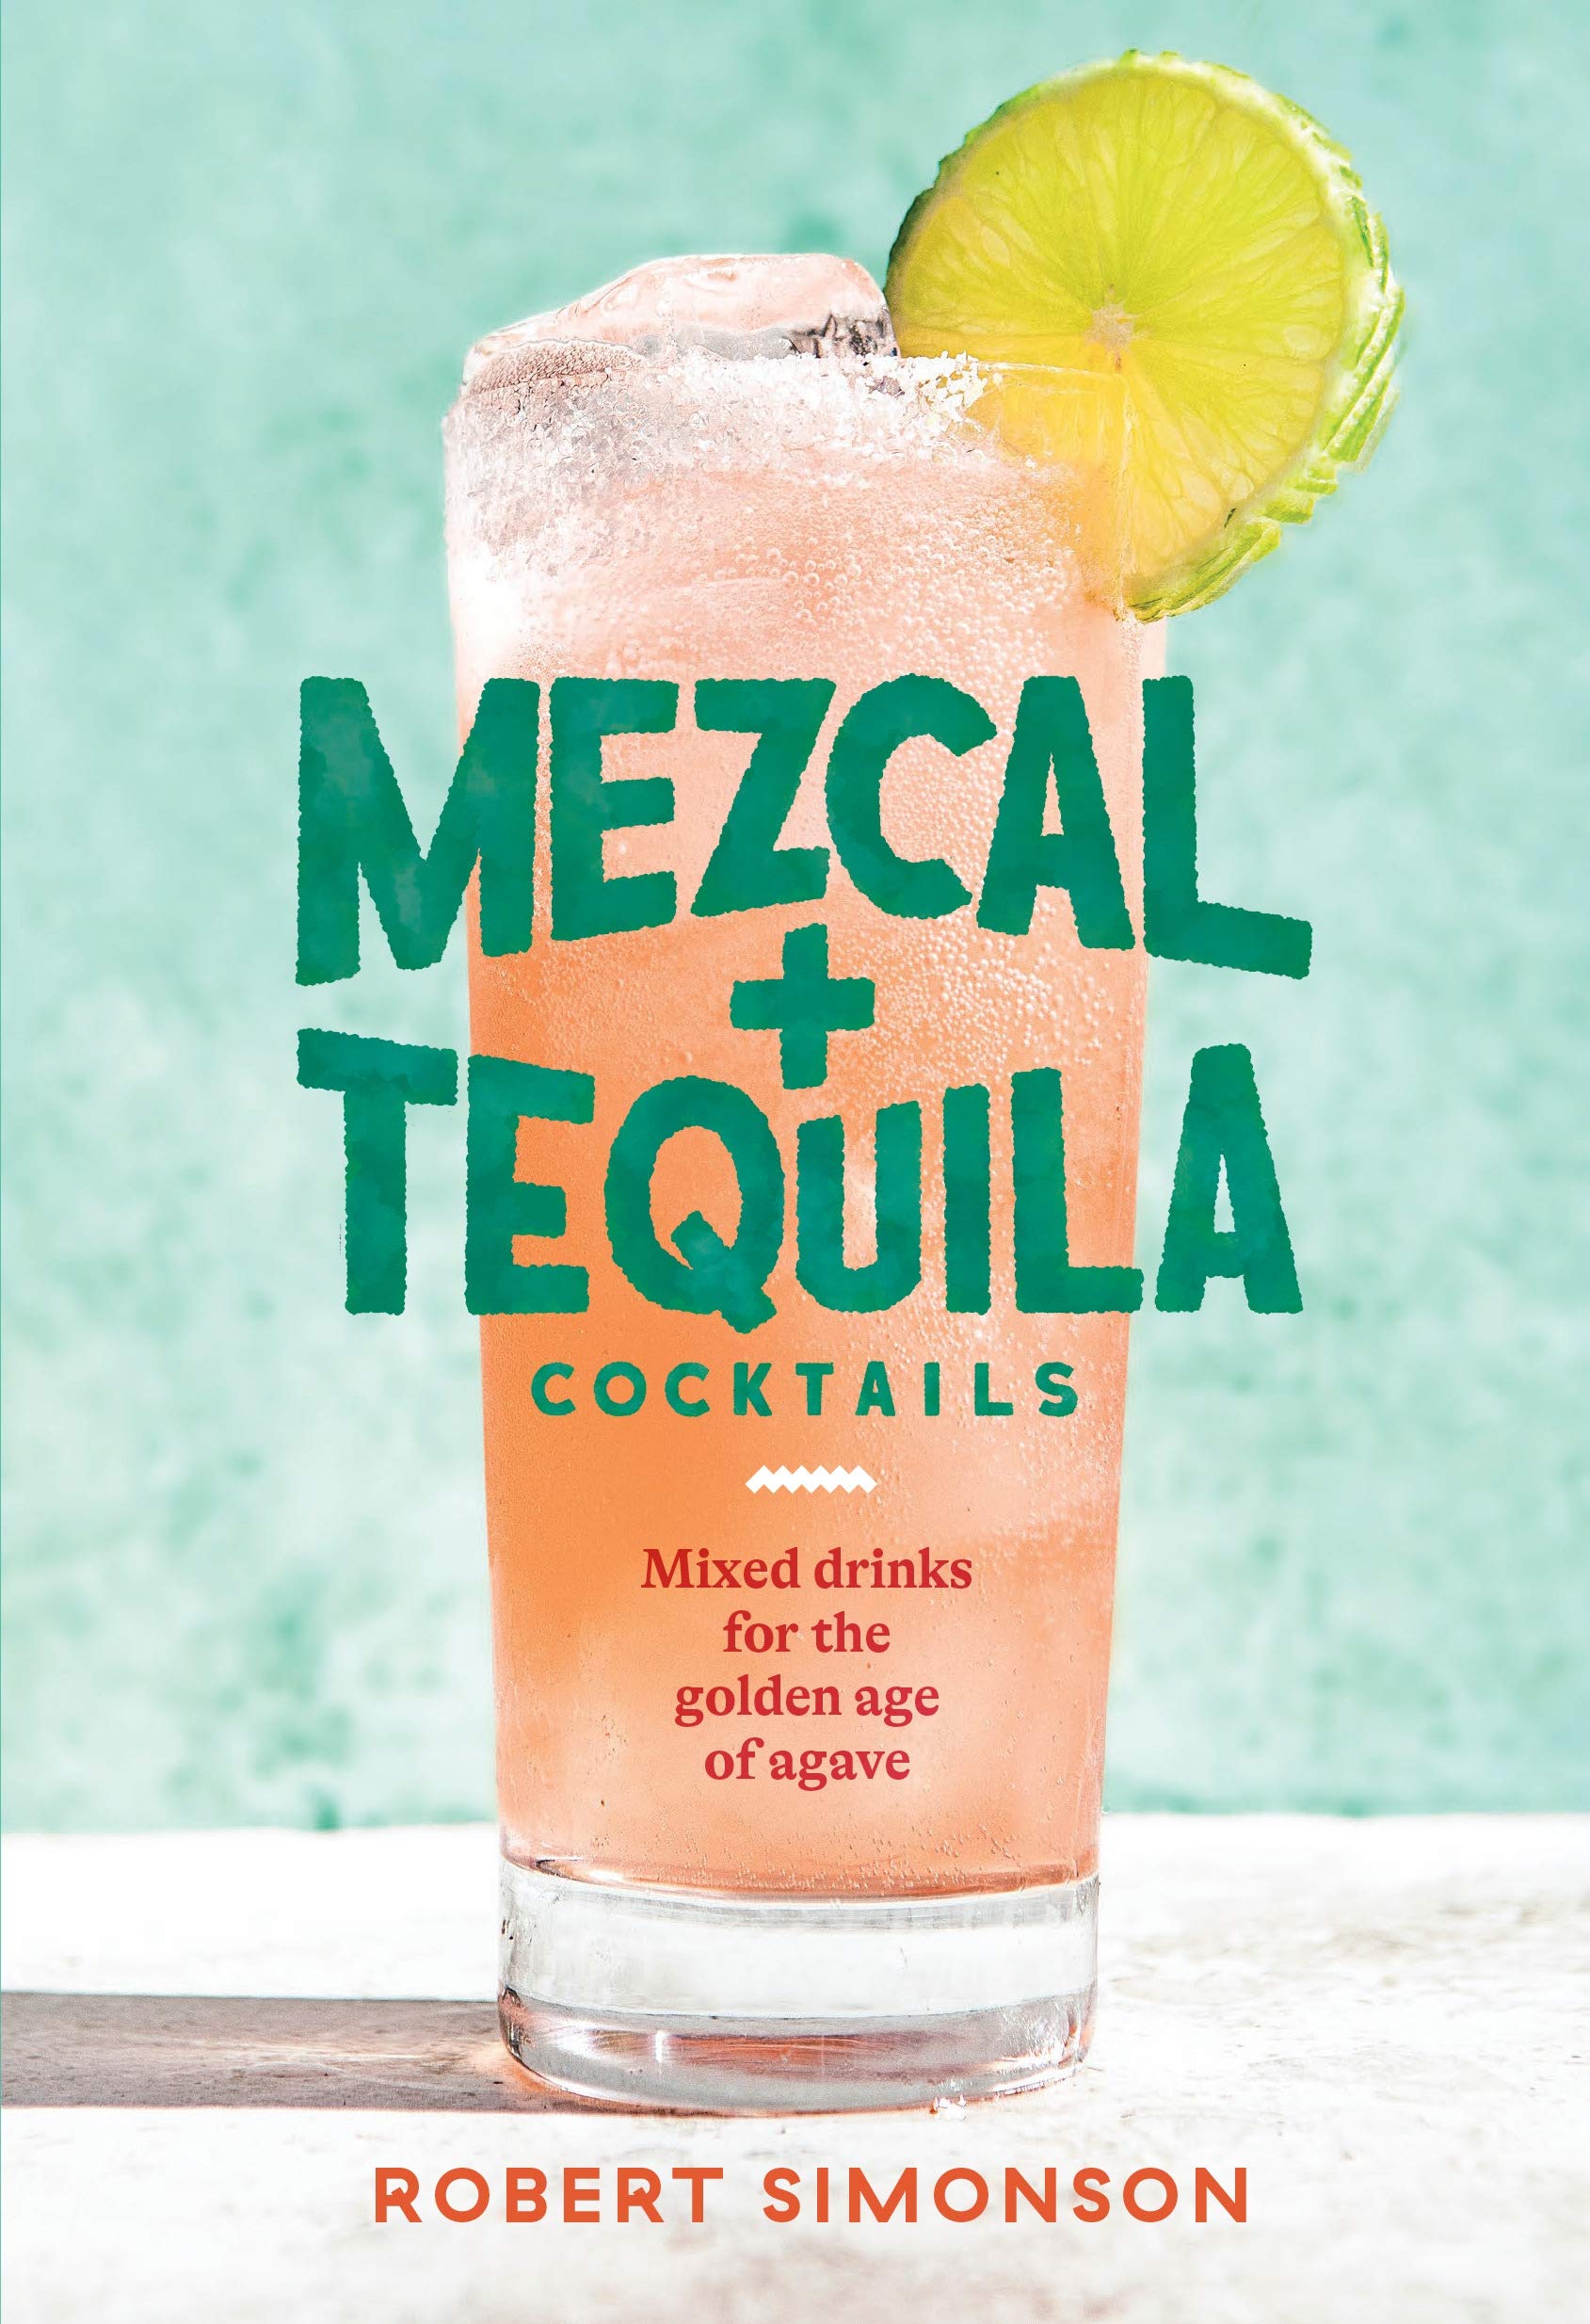 Mezcal and Tequila Cocktails: Mixed Drinks for the Golden Age of Agave (Robert Simonson) *Signed*